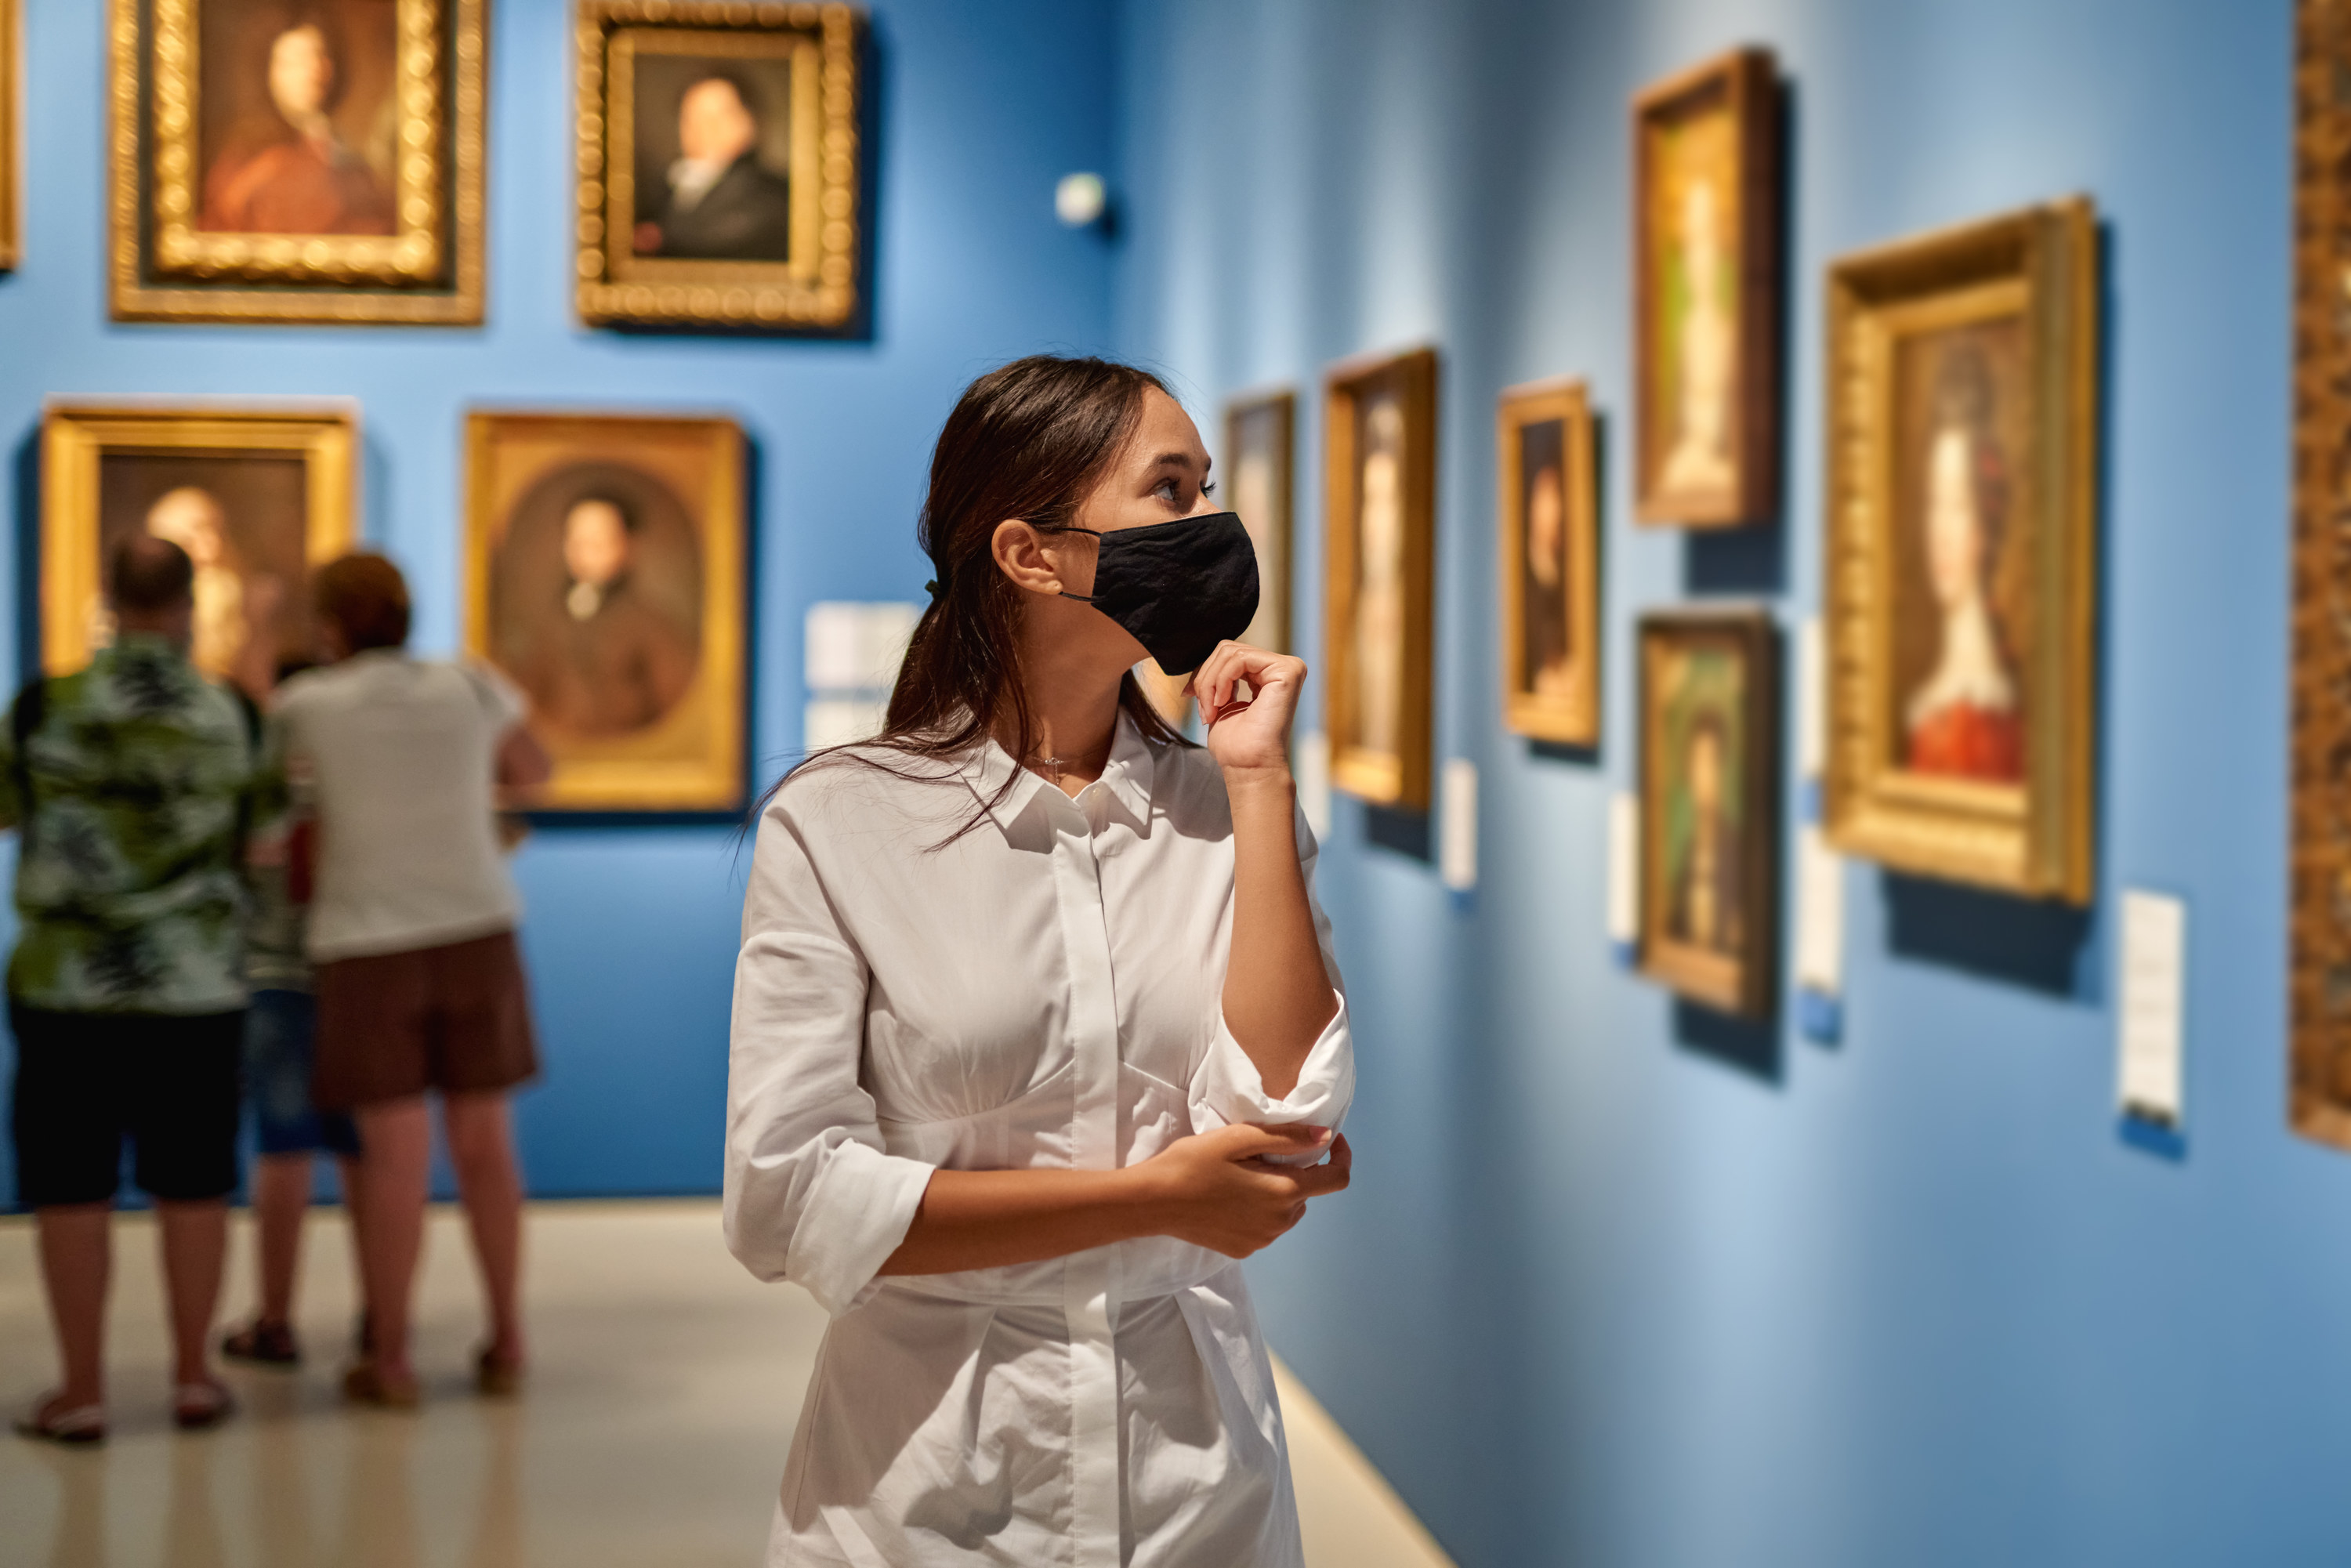 A woman in a white button-up and a black face masks takes in paintings at a museum